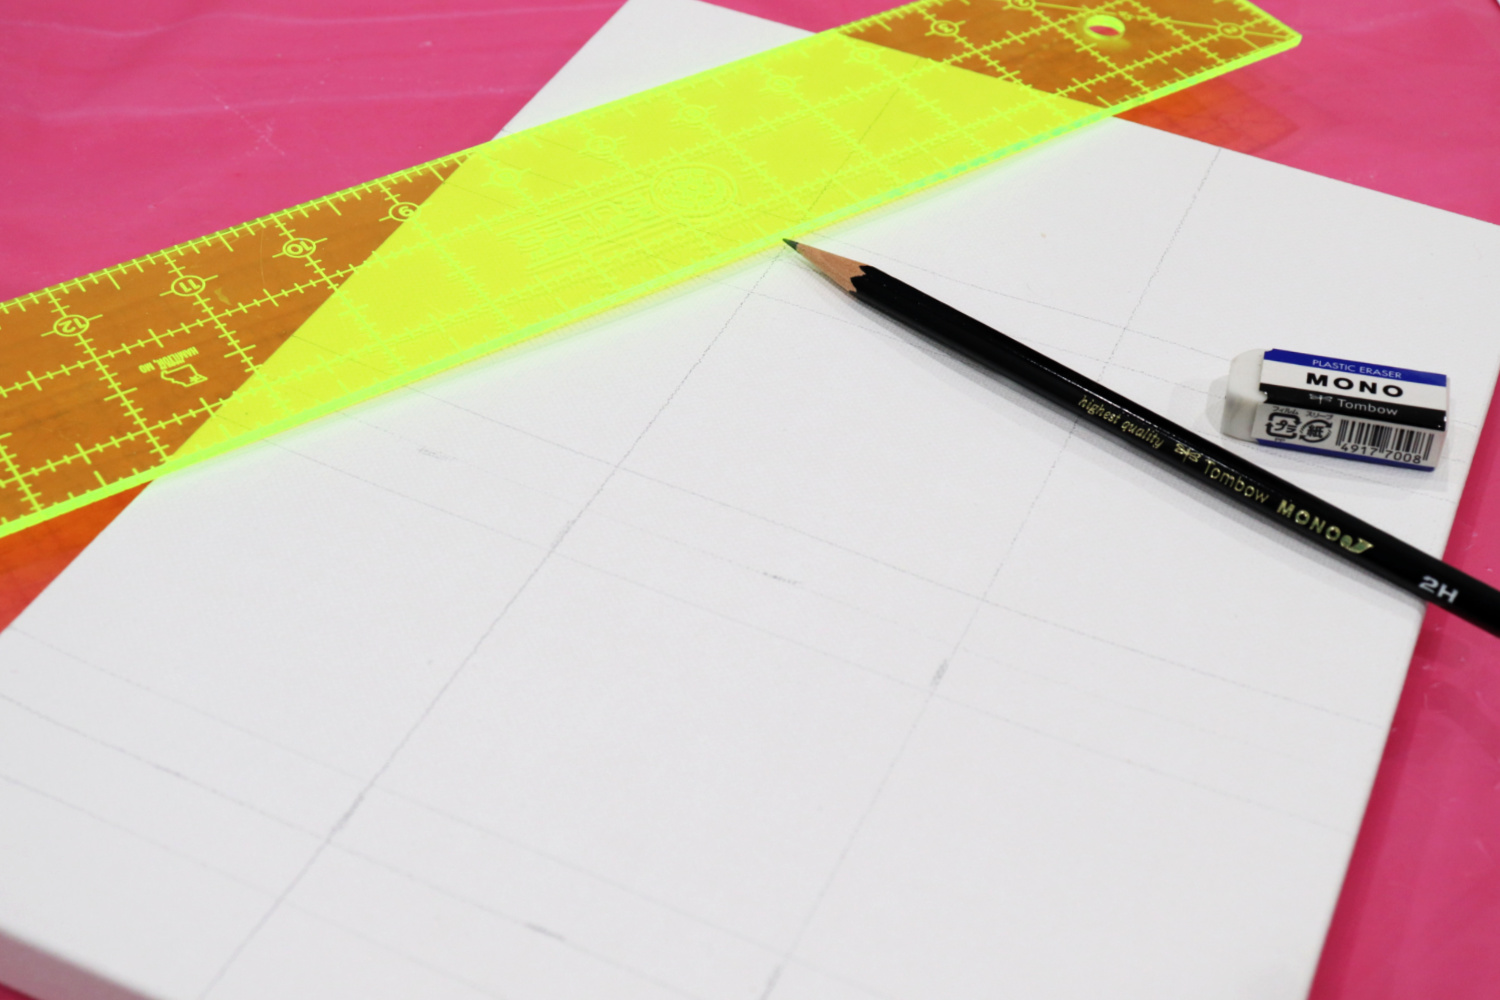 Image contains a white canvas with a black pencil, white eraser, and bright yellow ruler on top. The canvas is divided into sections with light pencil lines.